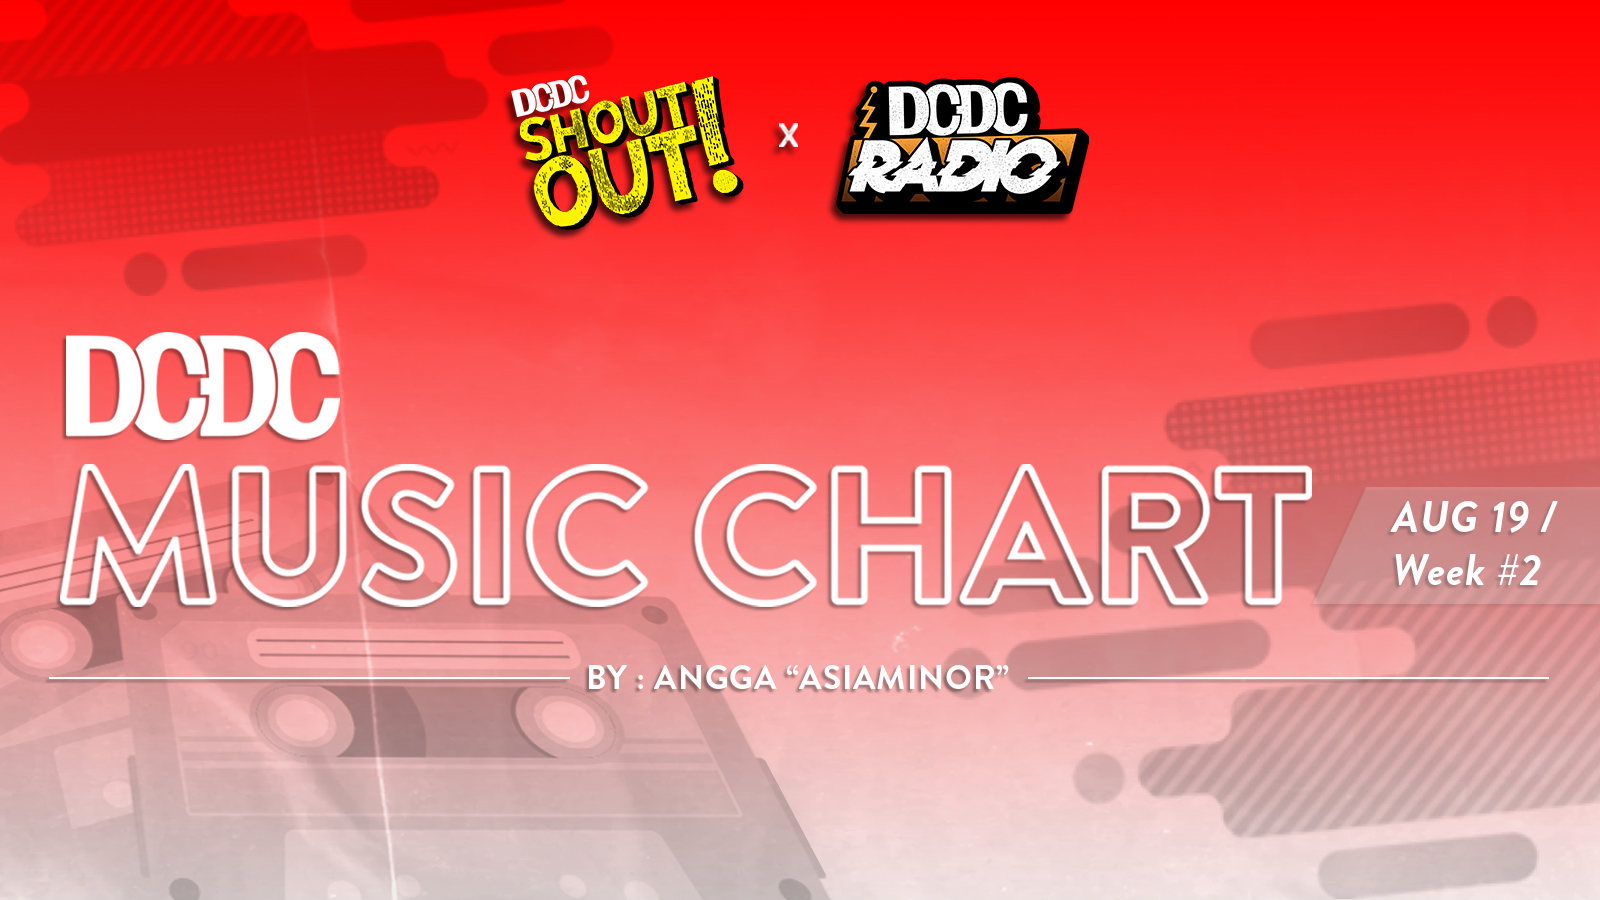 DCDC Music Chart - #2nd Week of August 2019